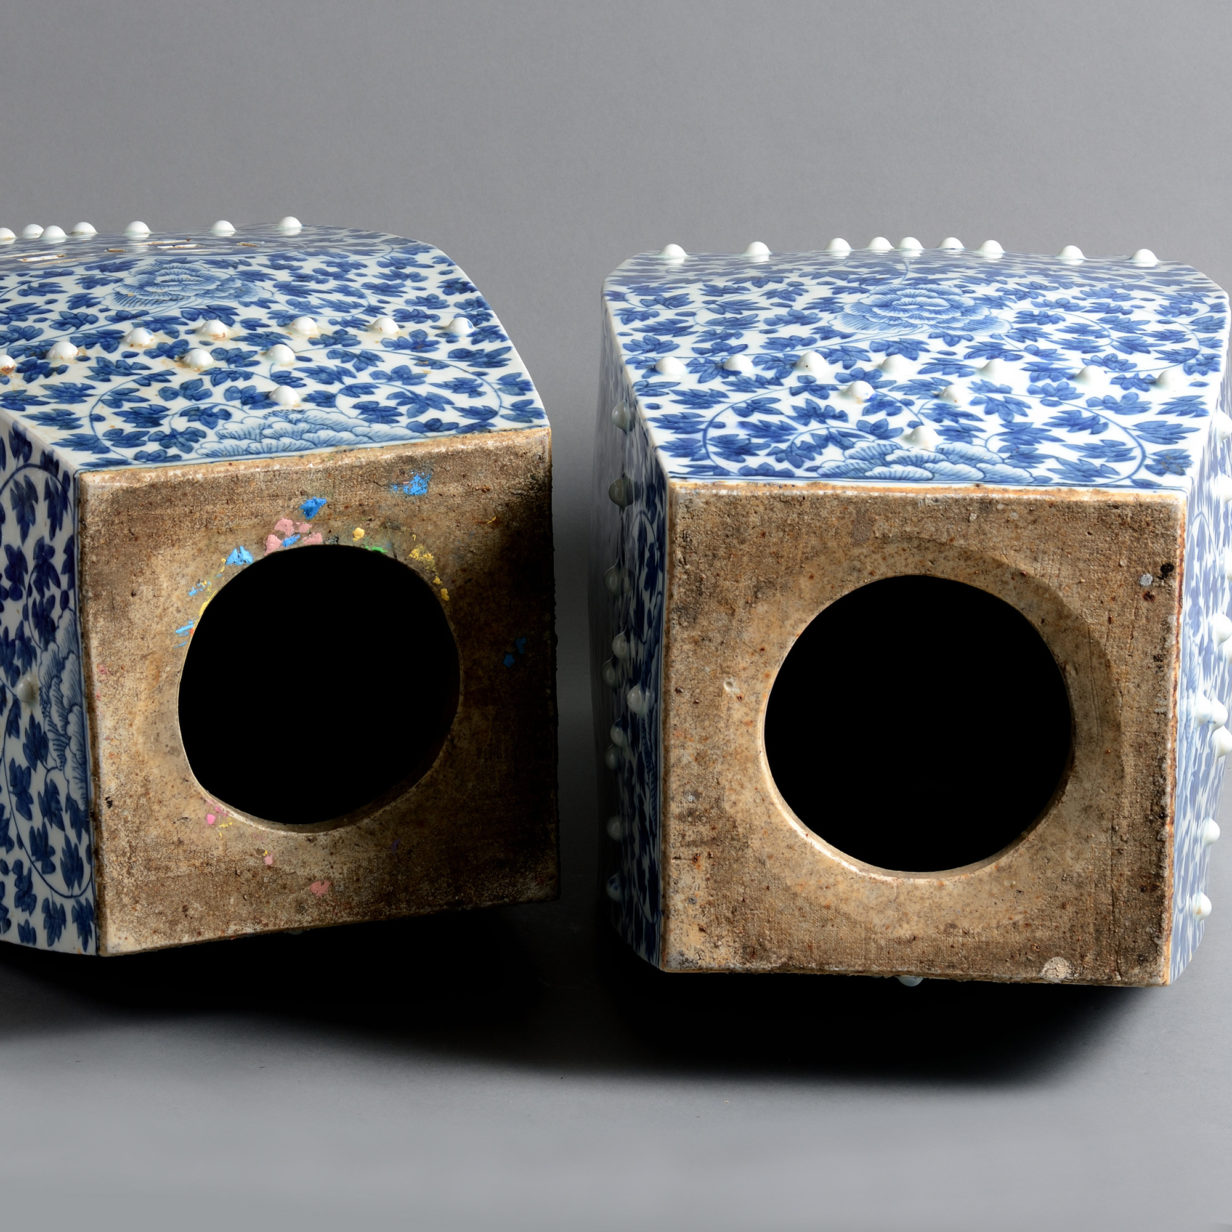 A pair of 19th century qing dynasty blue & white porcelain garden seats